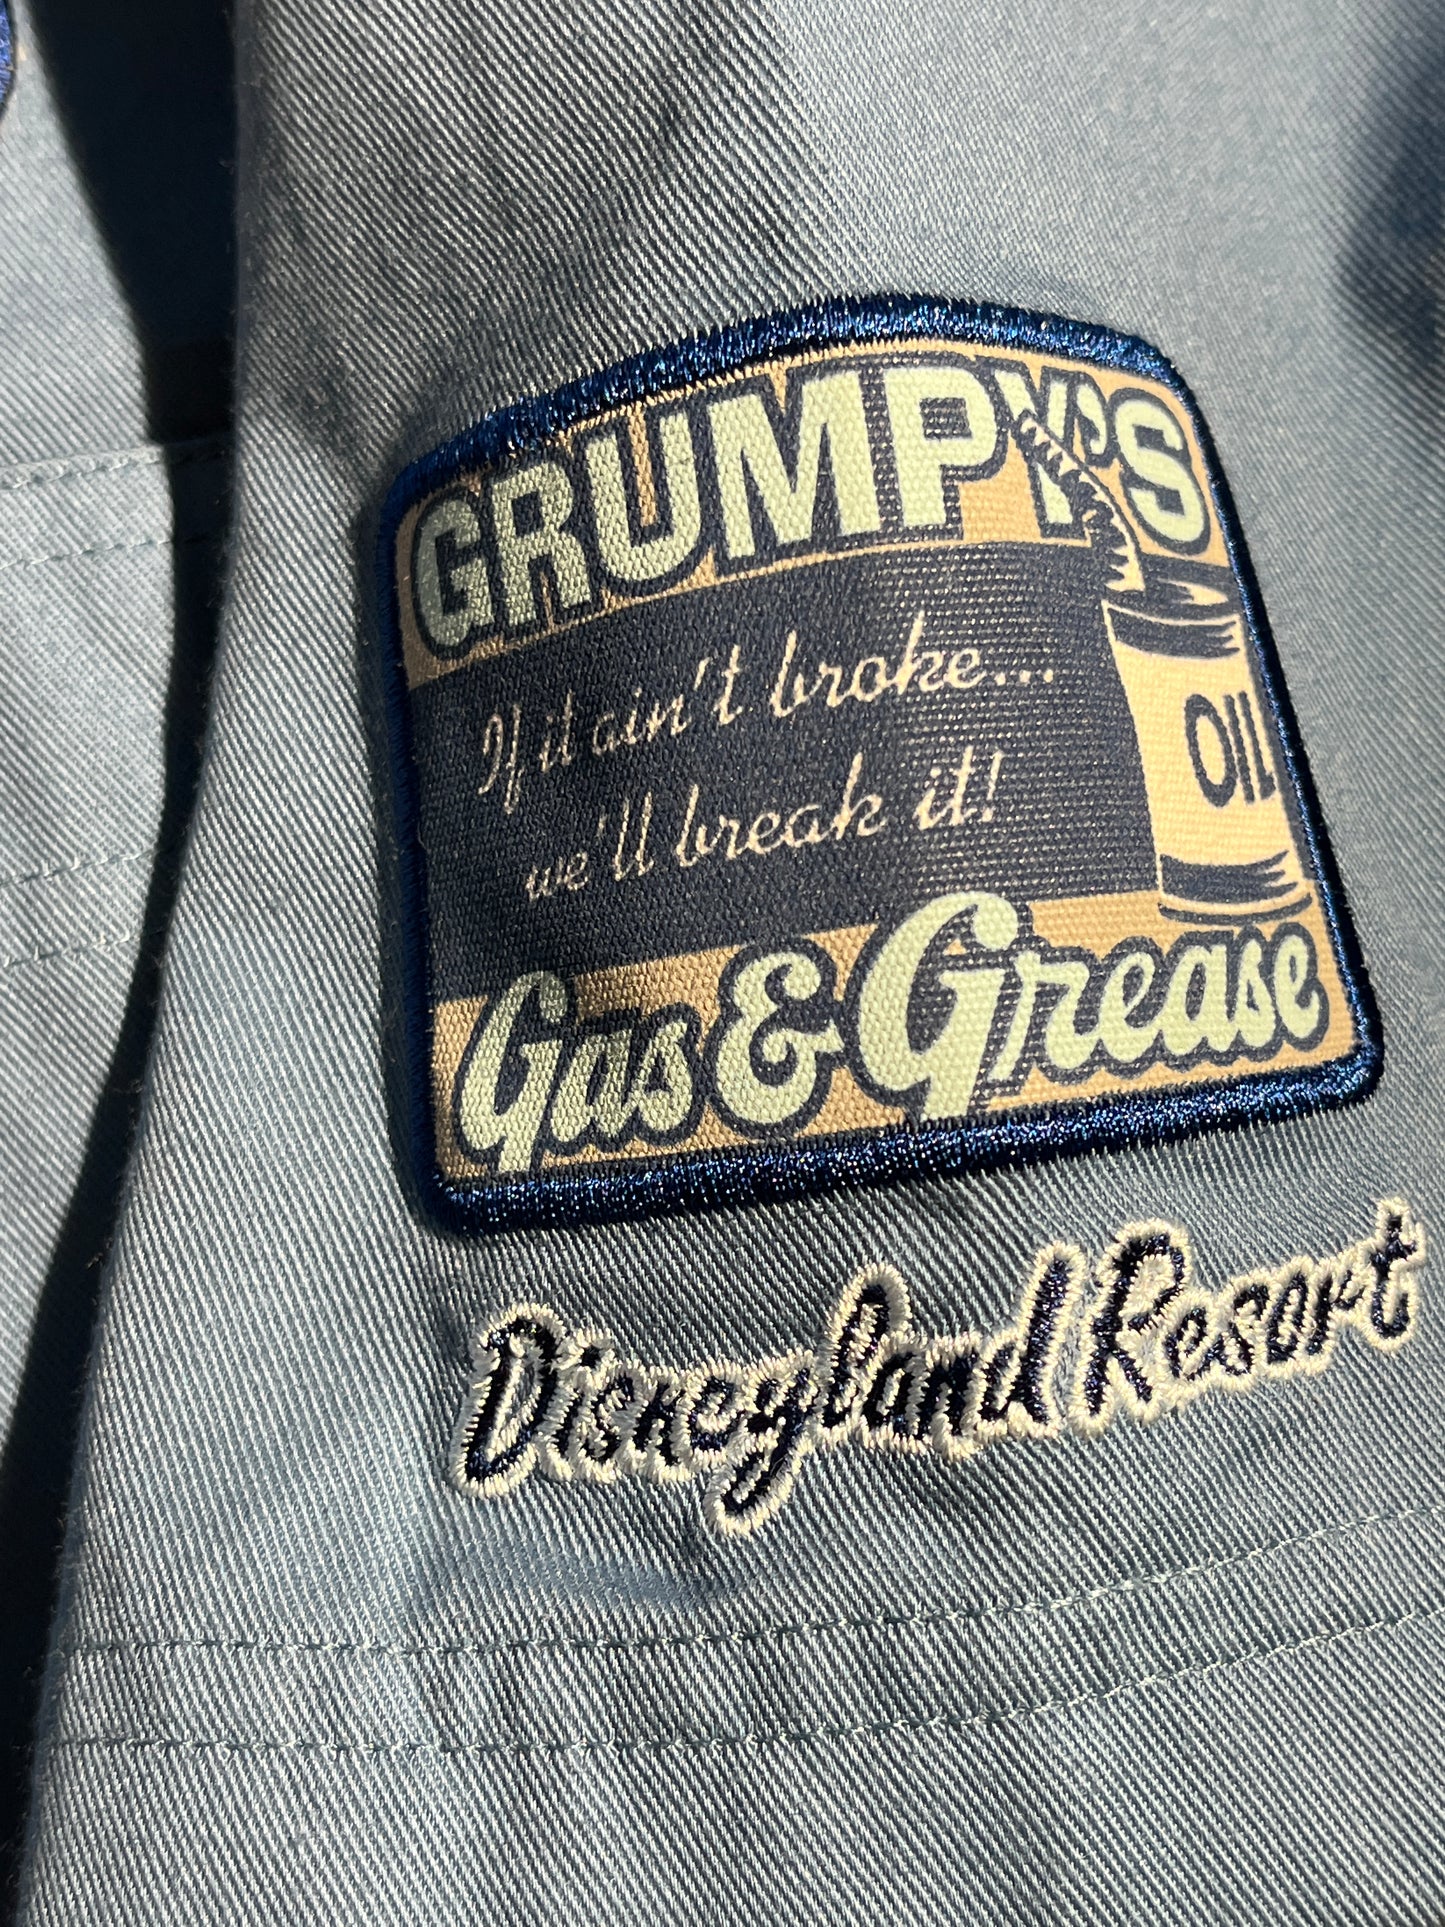 Vintage Grumpy Button Up Shirt GAS & GREASE